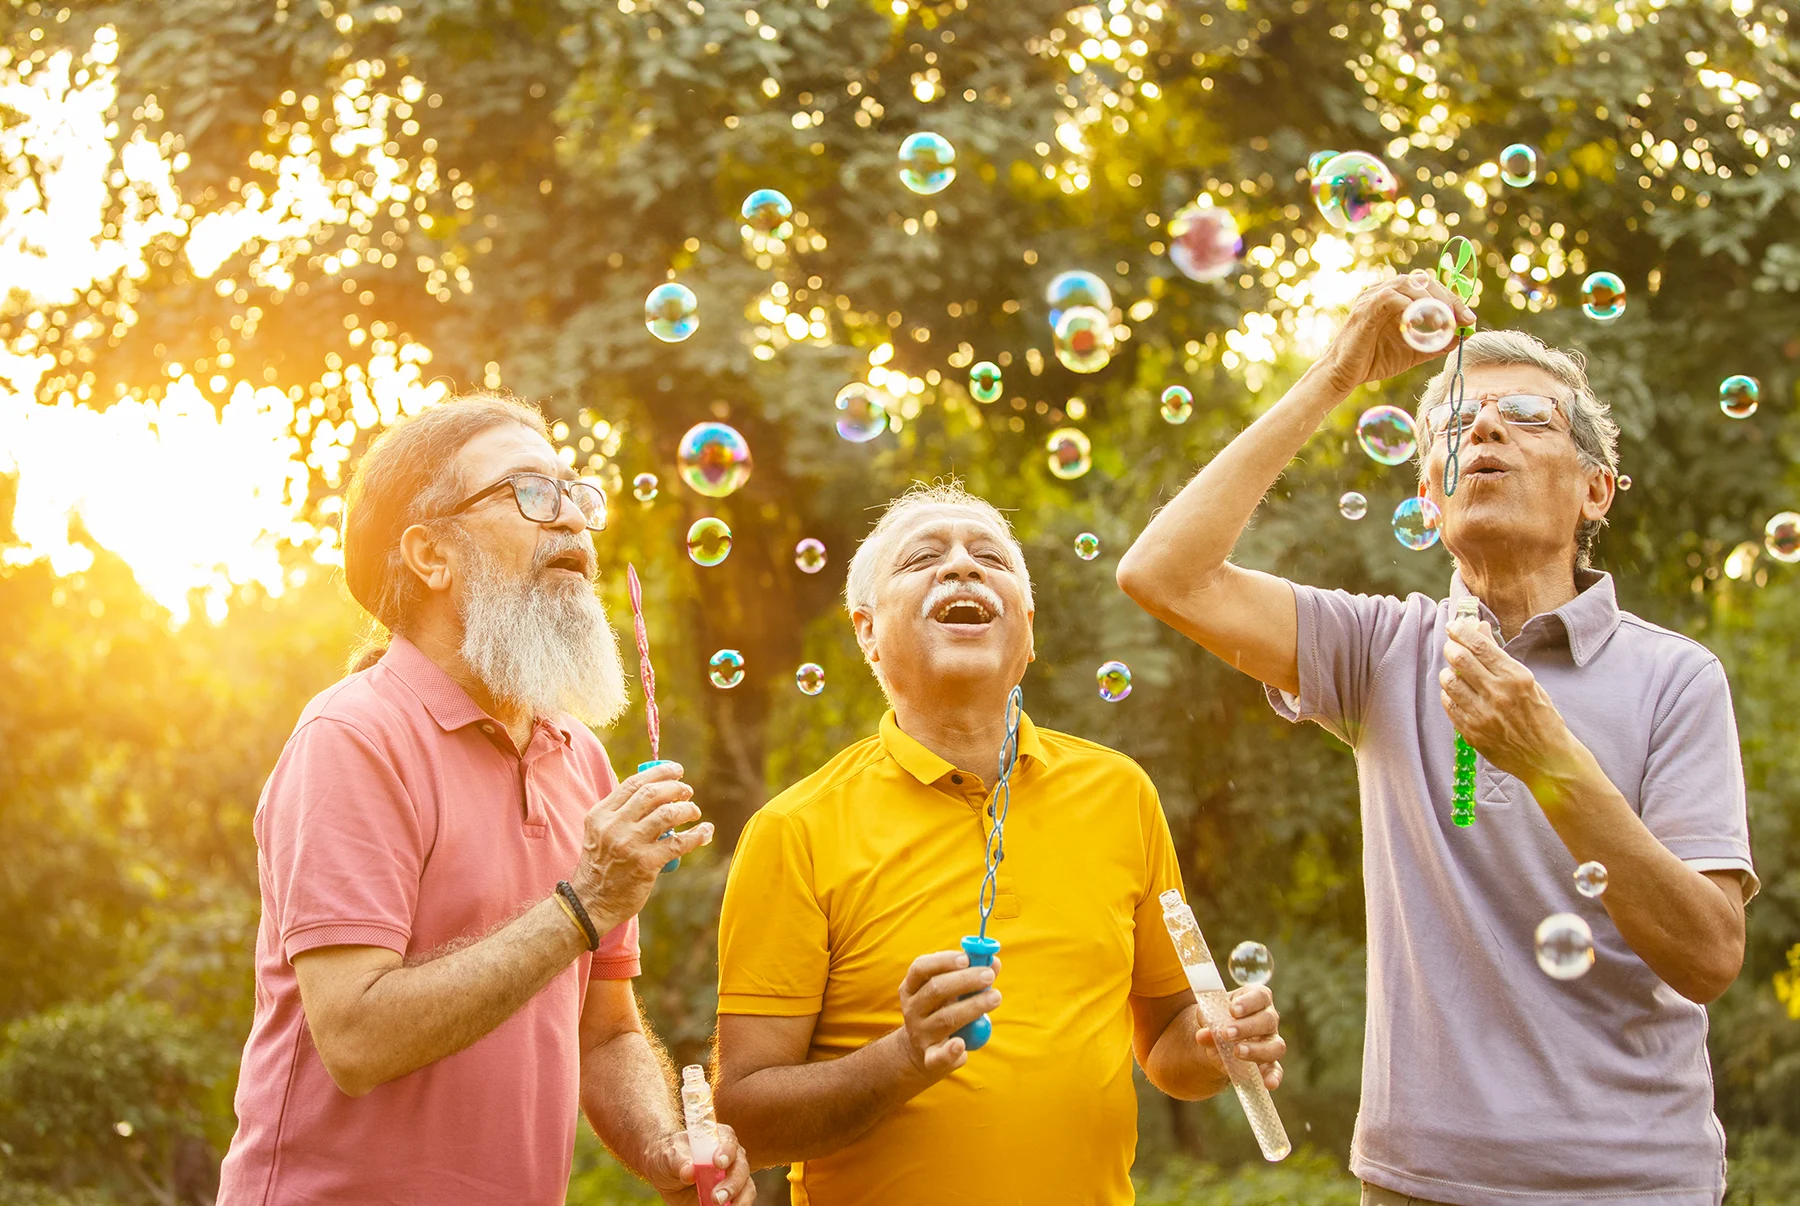 3 mature South Asian men laughing and blowing bubbles outside on a sunny day.